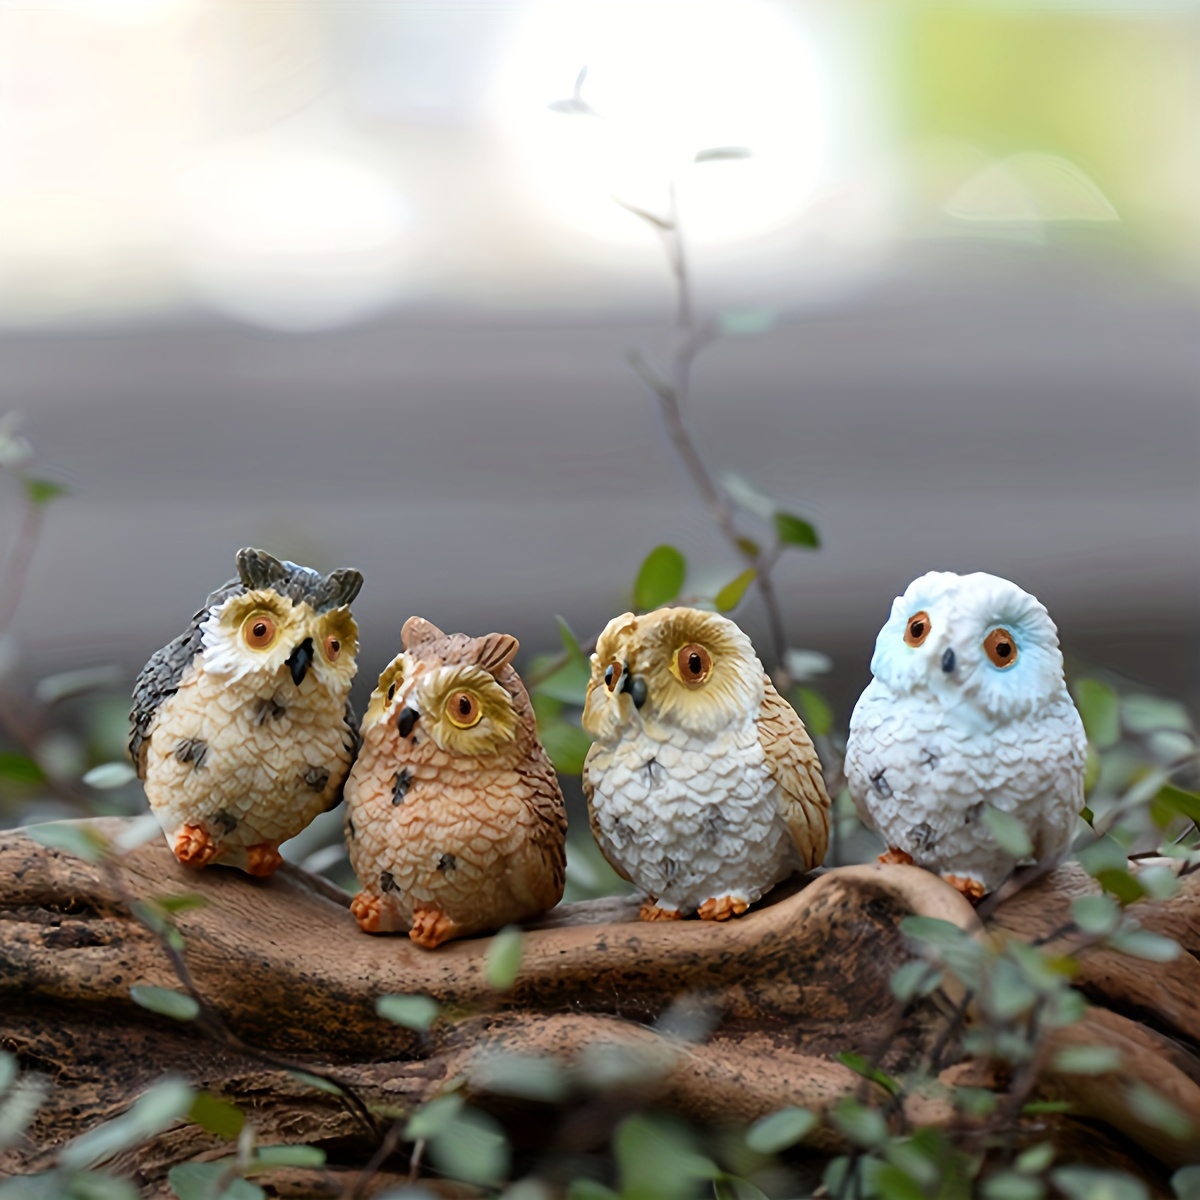 

4pcs Miniature Cute Owls Statue Ornament, Moss Micro Landscape, Resin Owl Figurines With Exposed Feet, Creative Greenery Gift, Garden Decor Ornaments